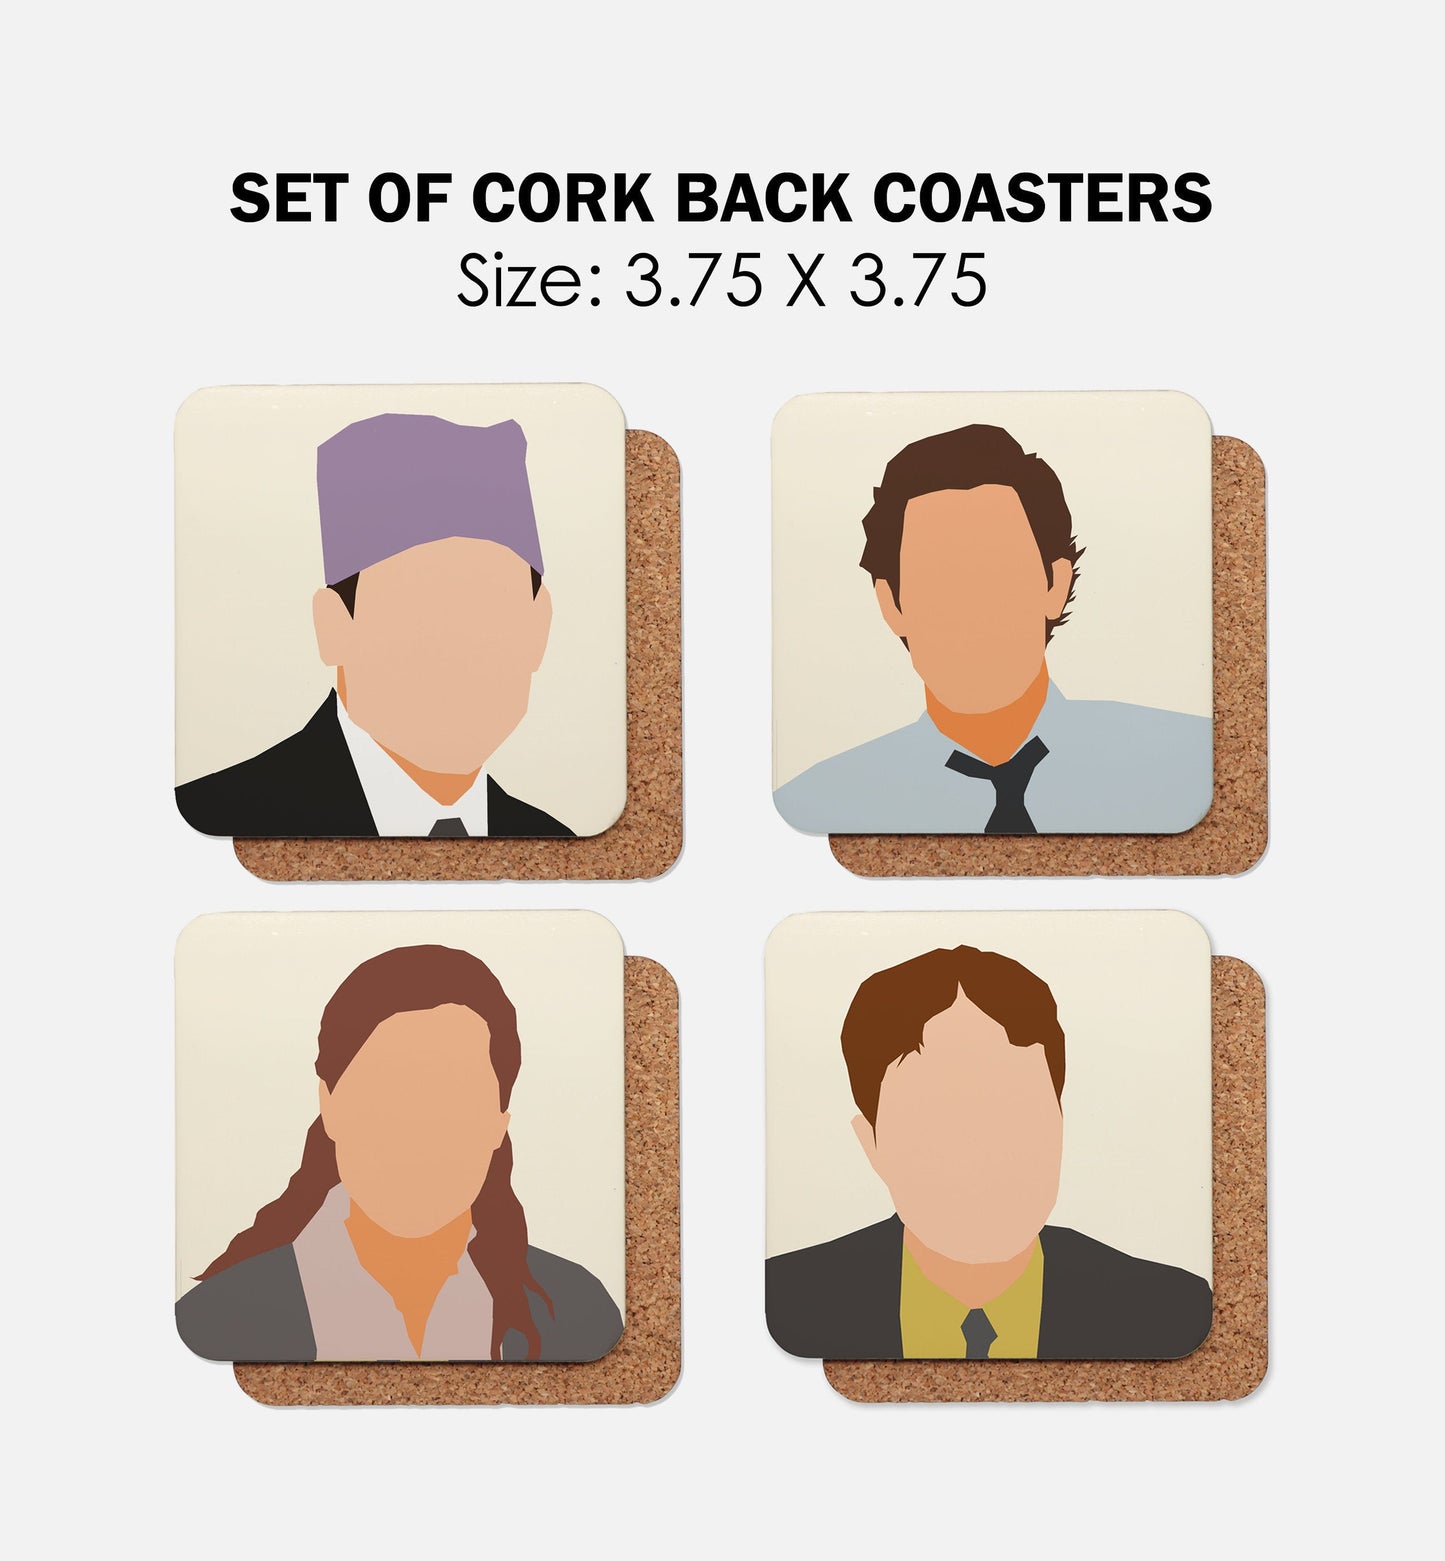 Coaster of The Office characters Prison Mike, Jim Halpert, Pam Beesly and Dwight Schrute